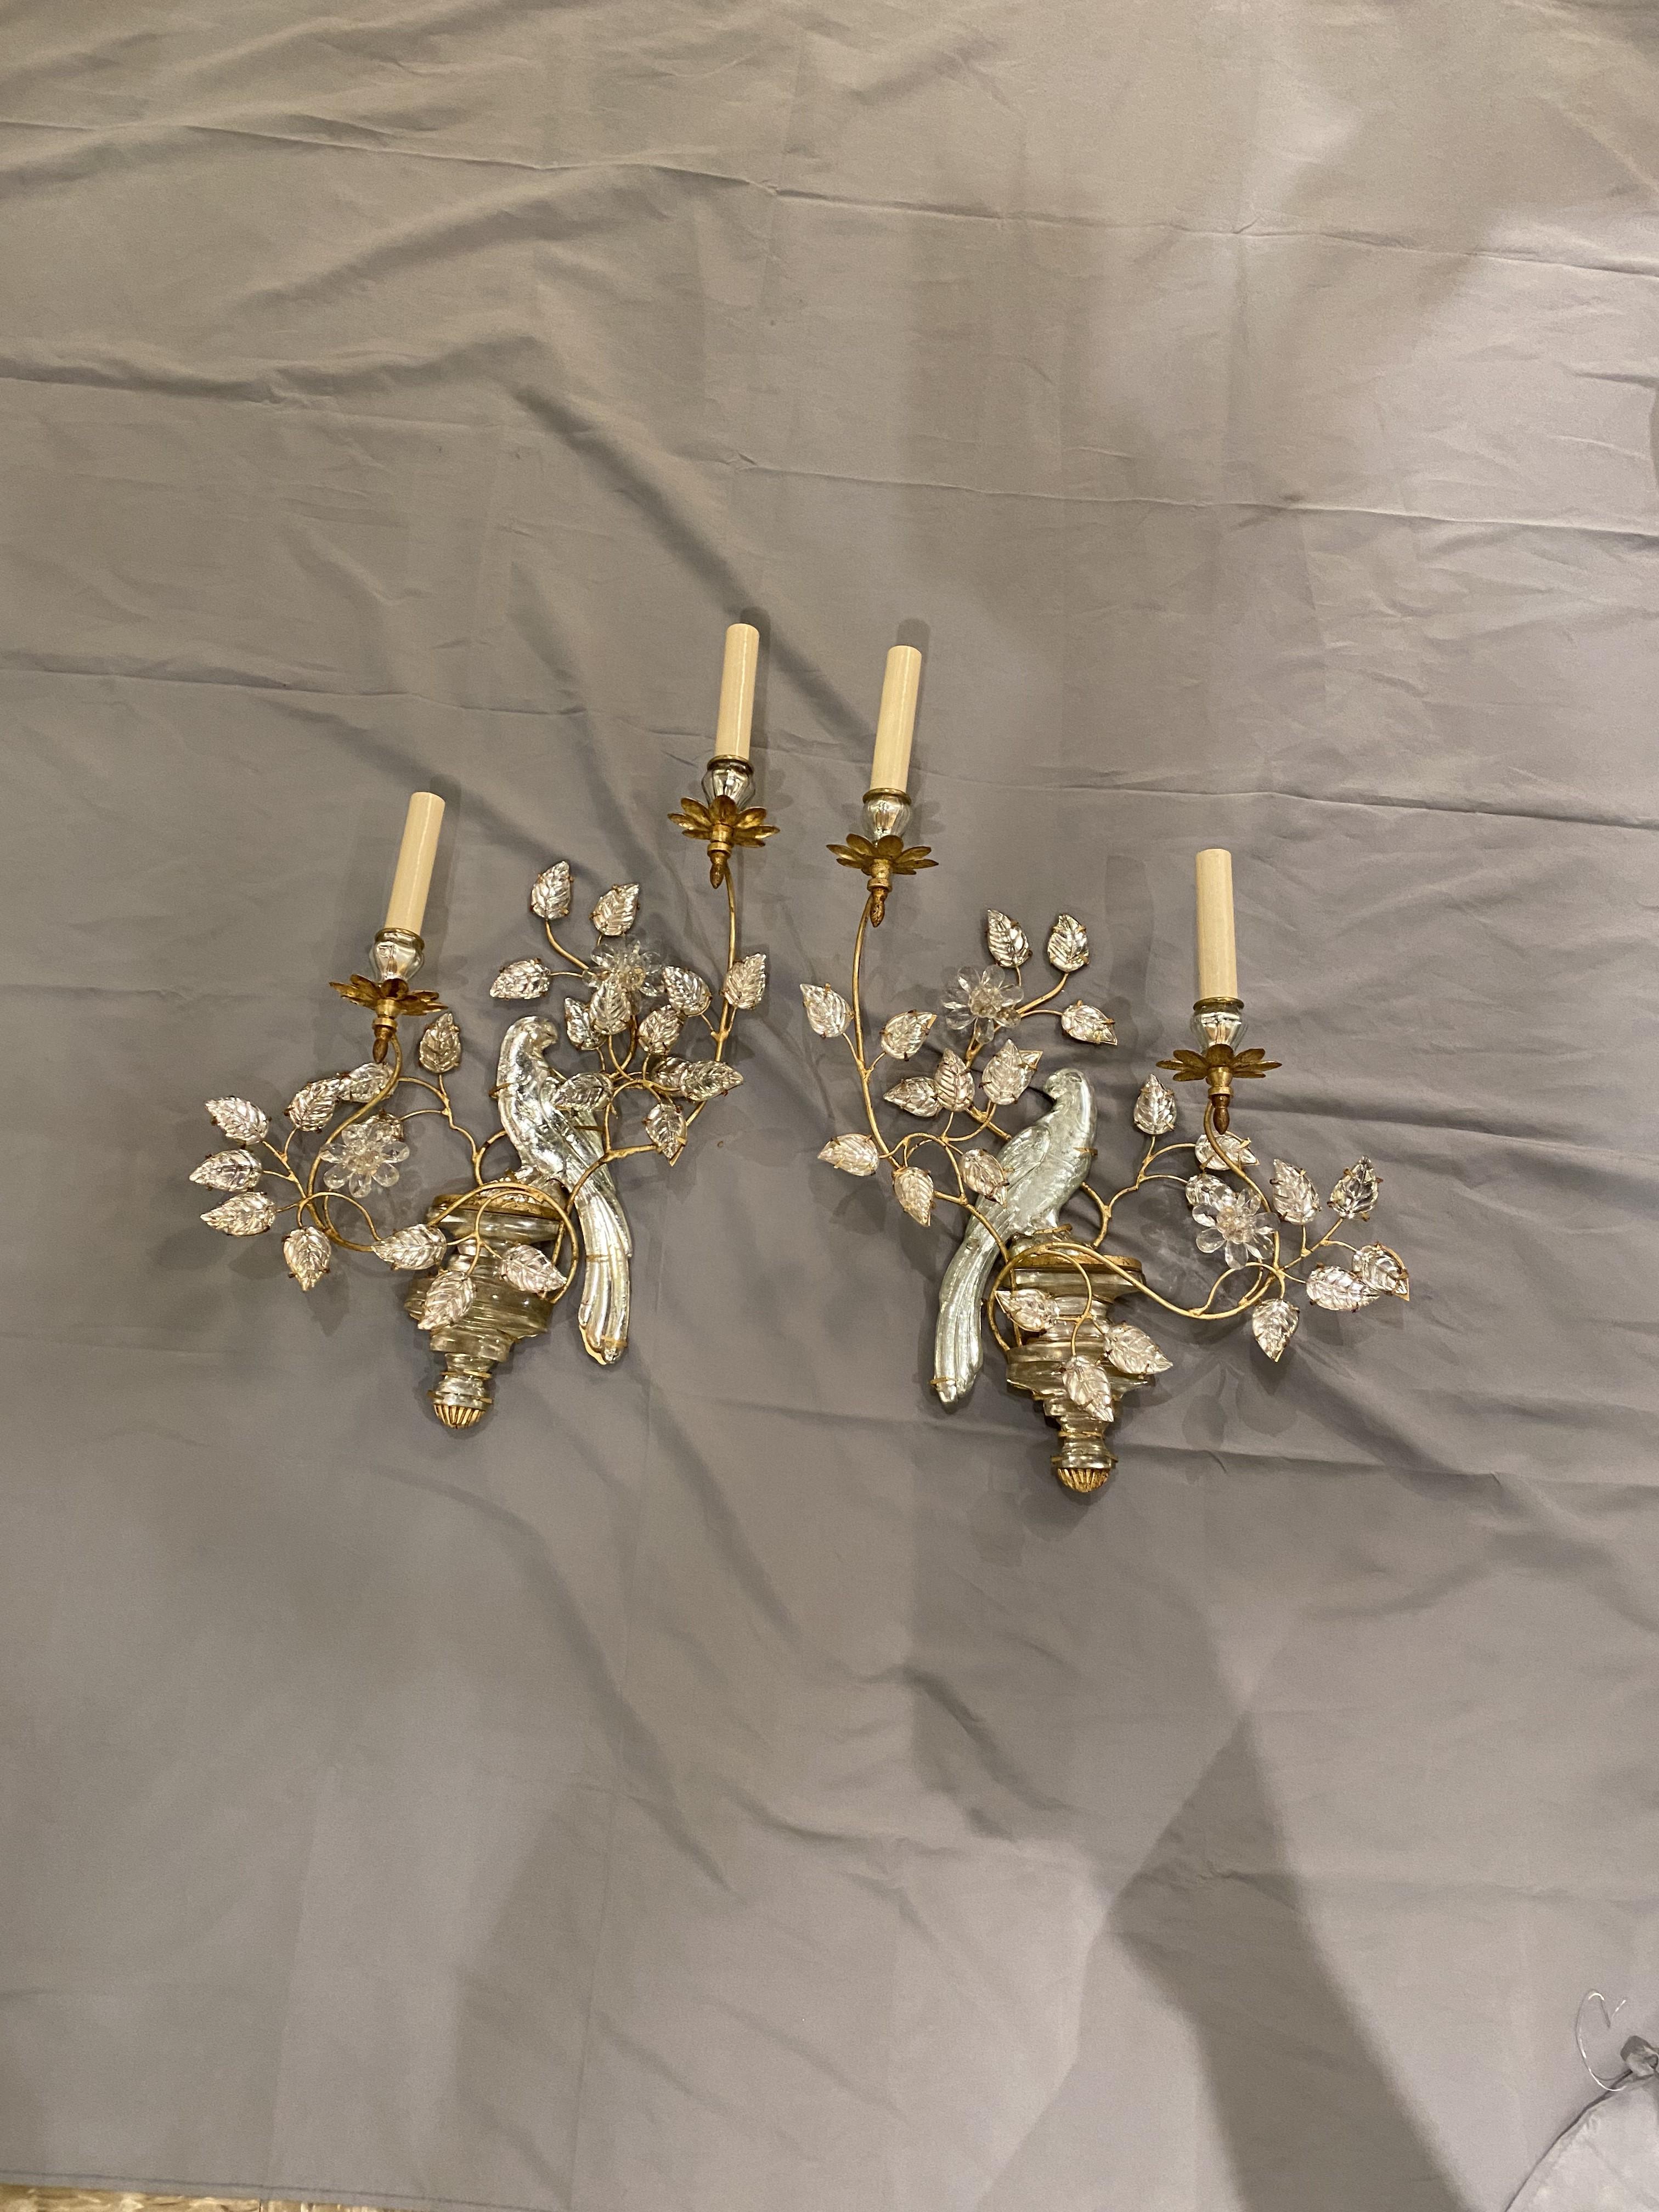 French Provincial 1930's French Bagues Gilt Metal 2 Lights Sconces with Crystal Birds For Sale